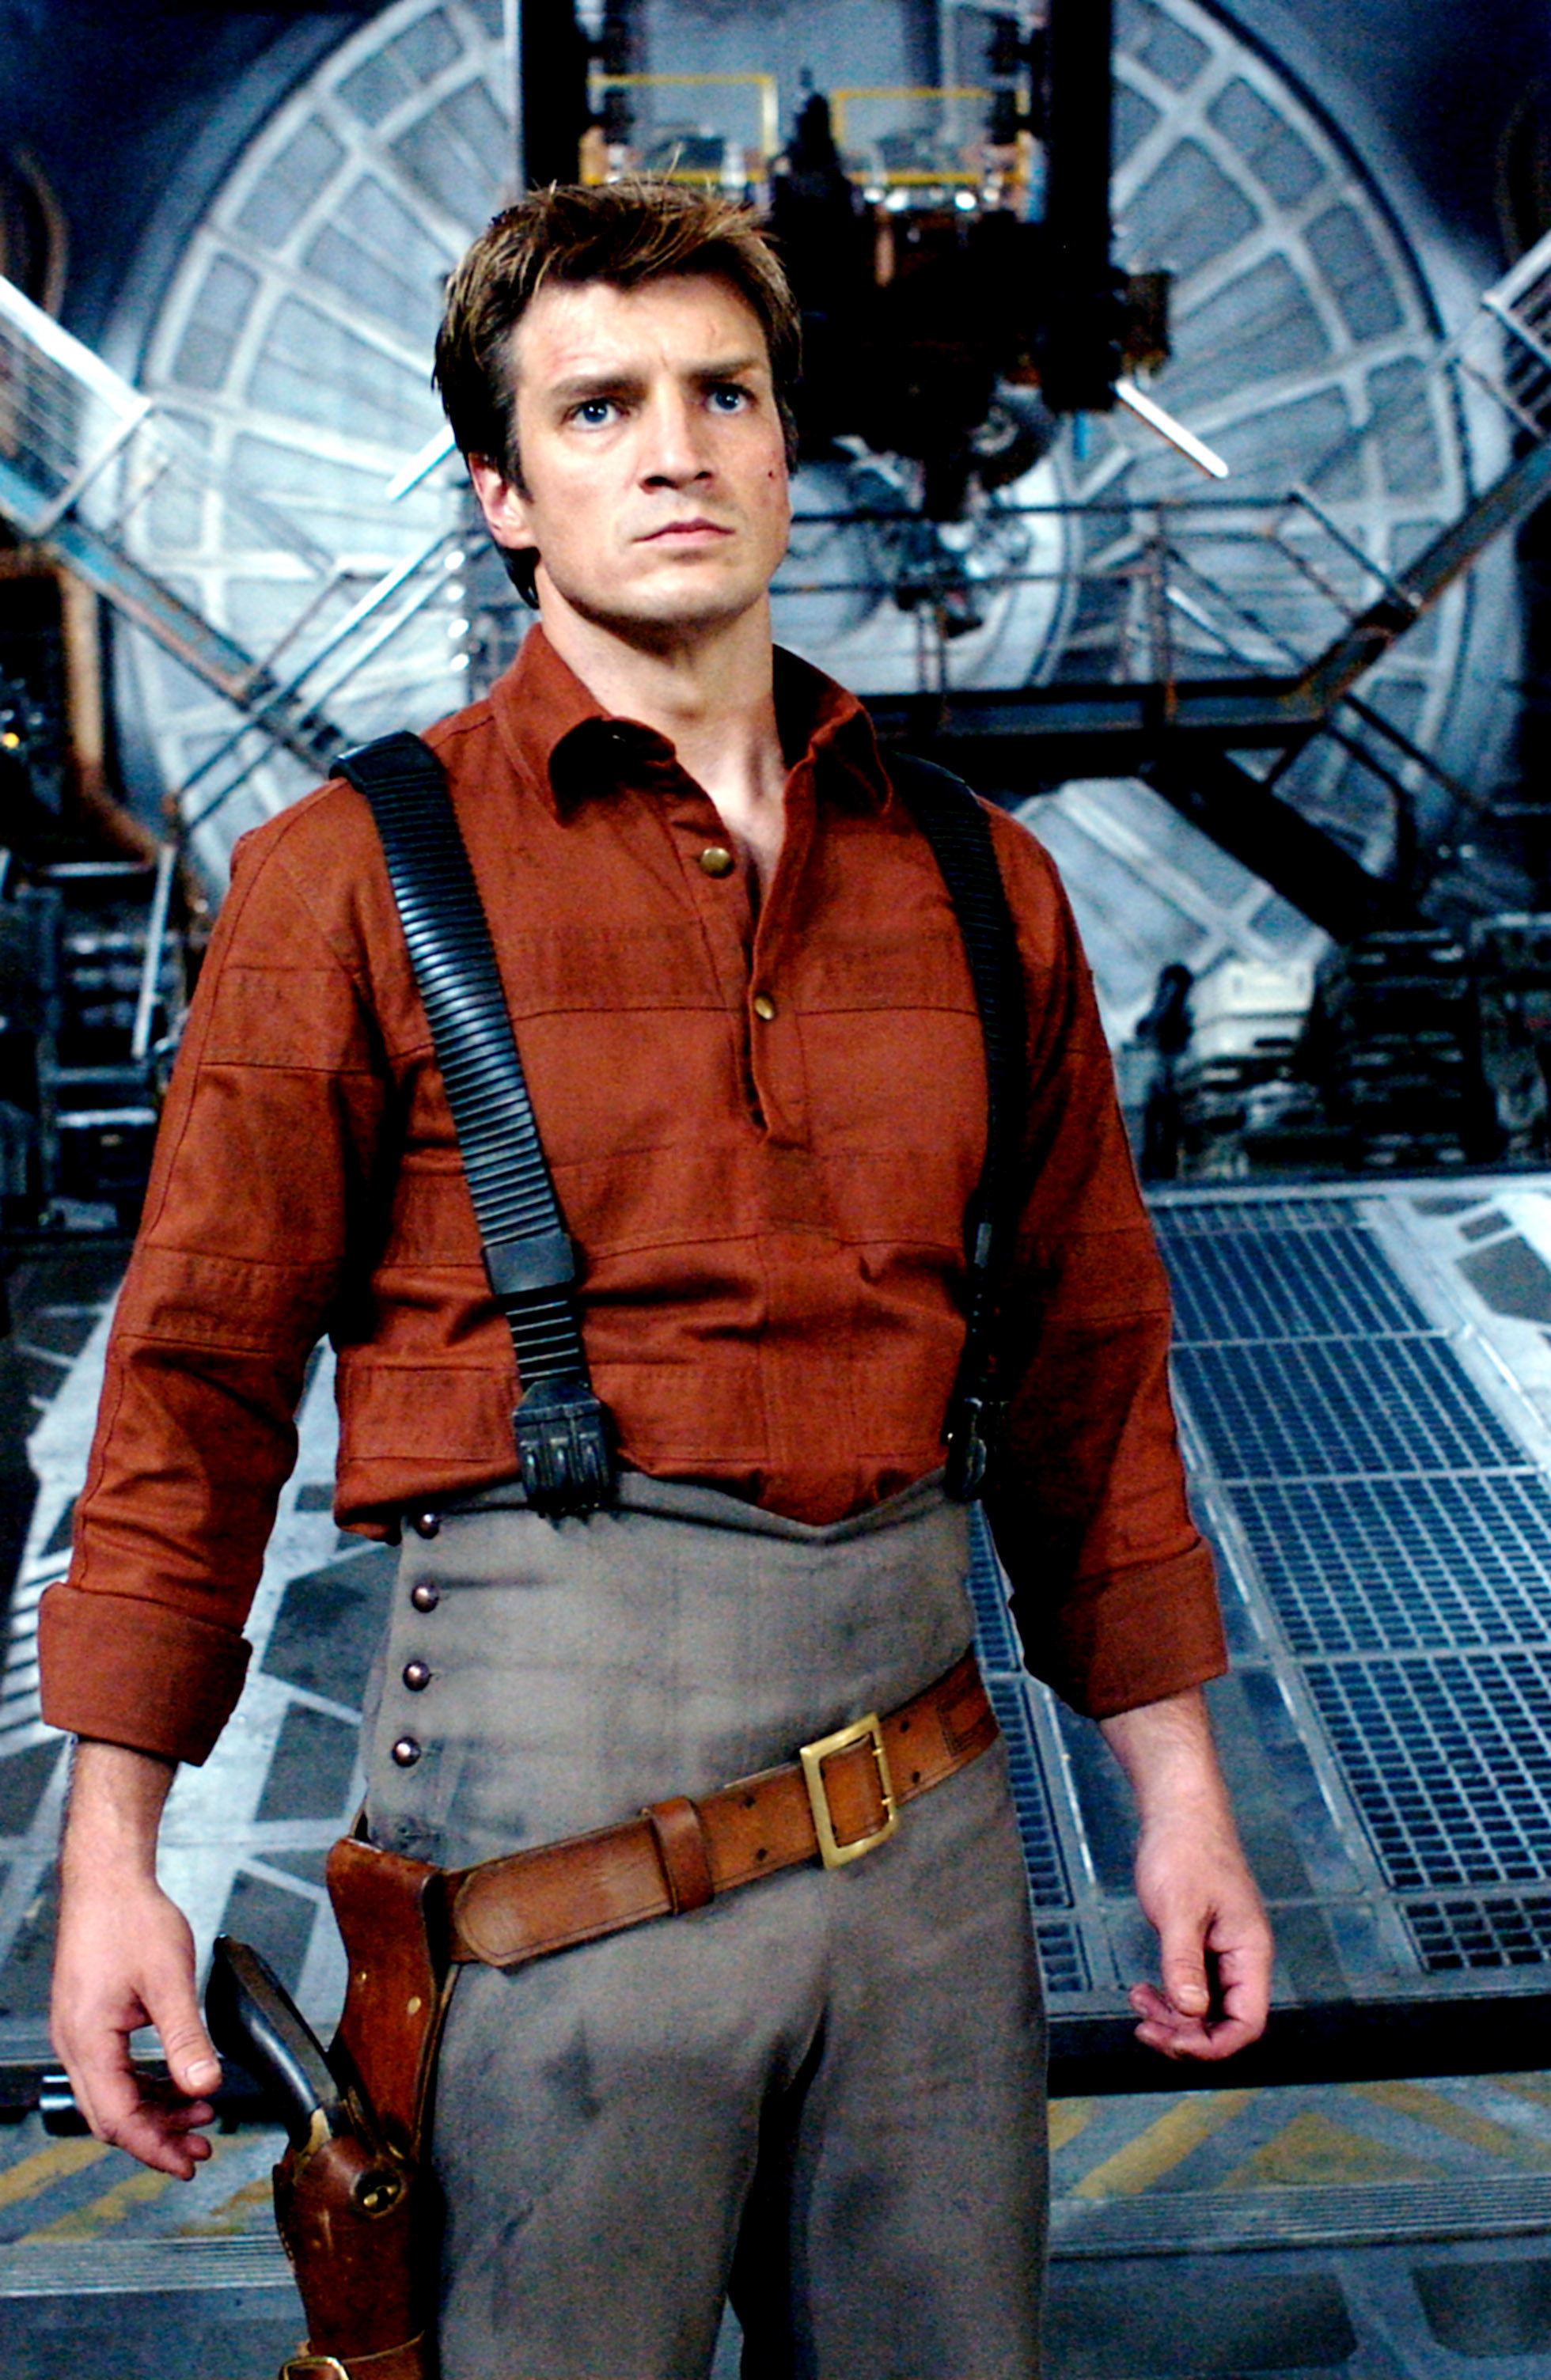 Nathan in pants with suspenders and a weapon hanging from a belt